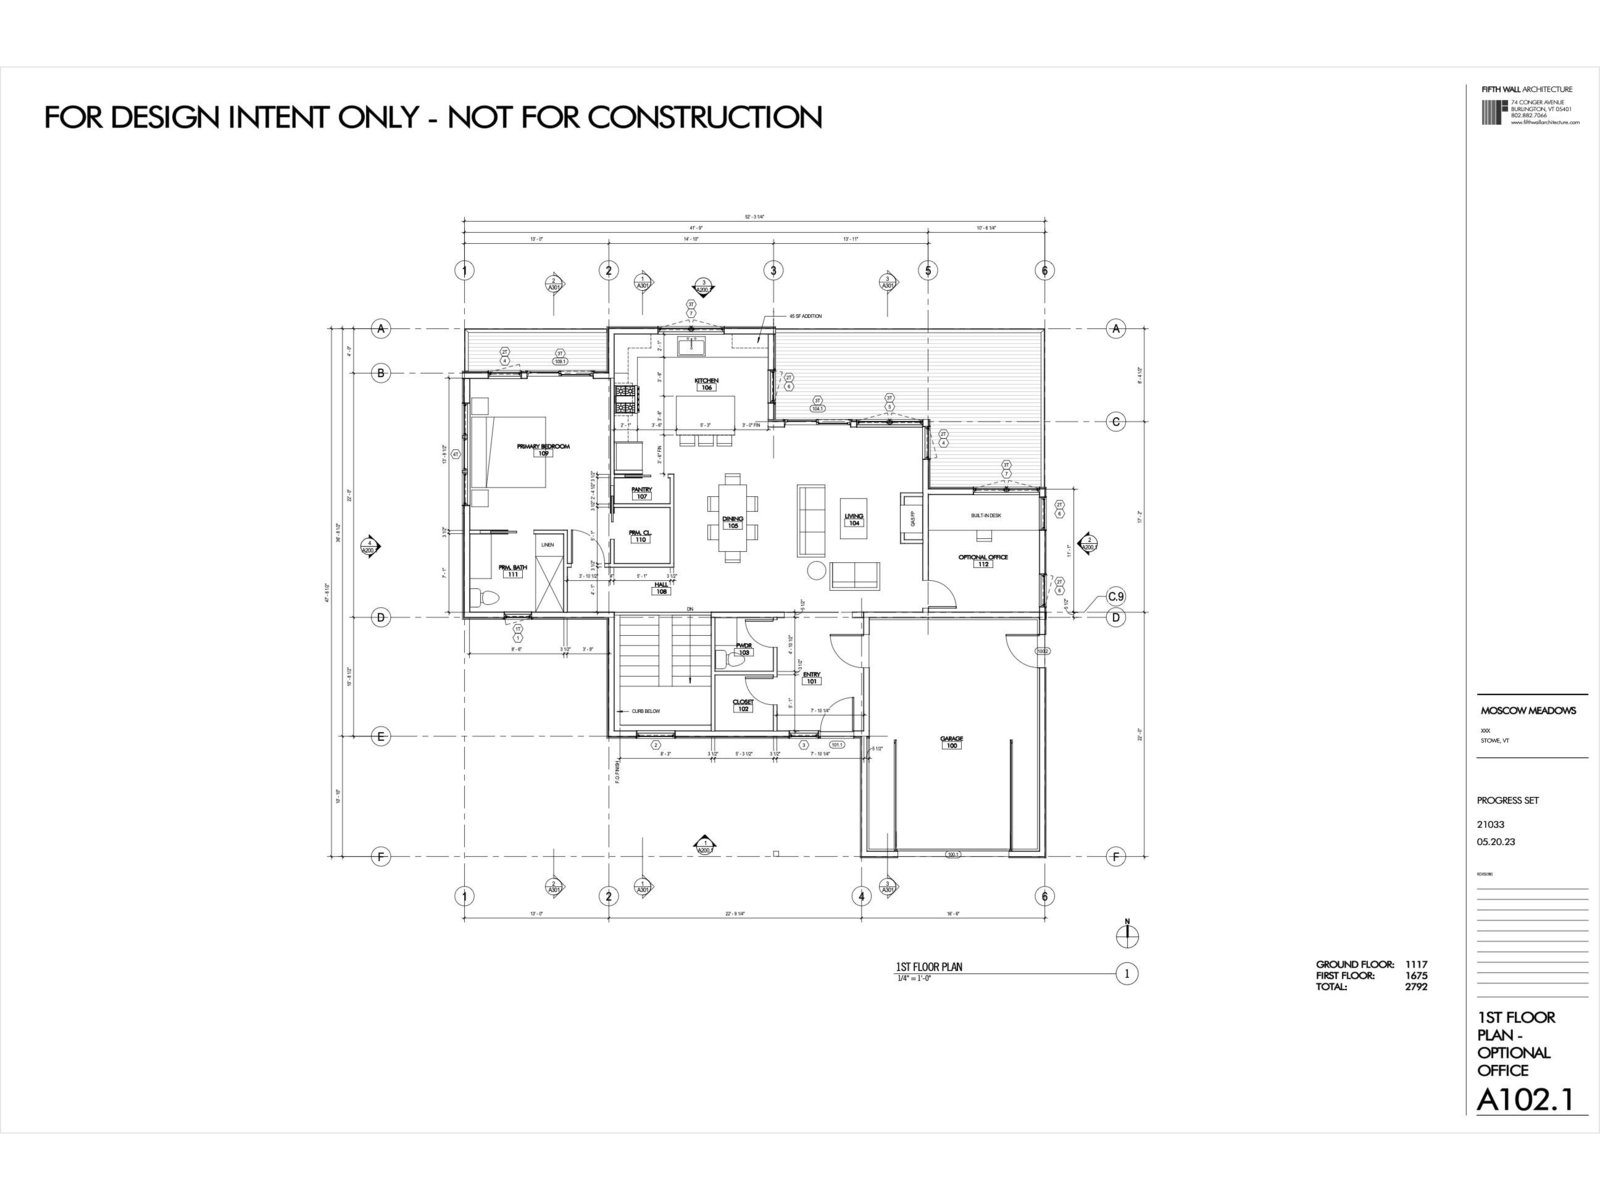 Floor plan with optional office